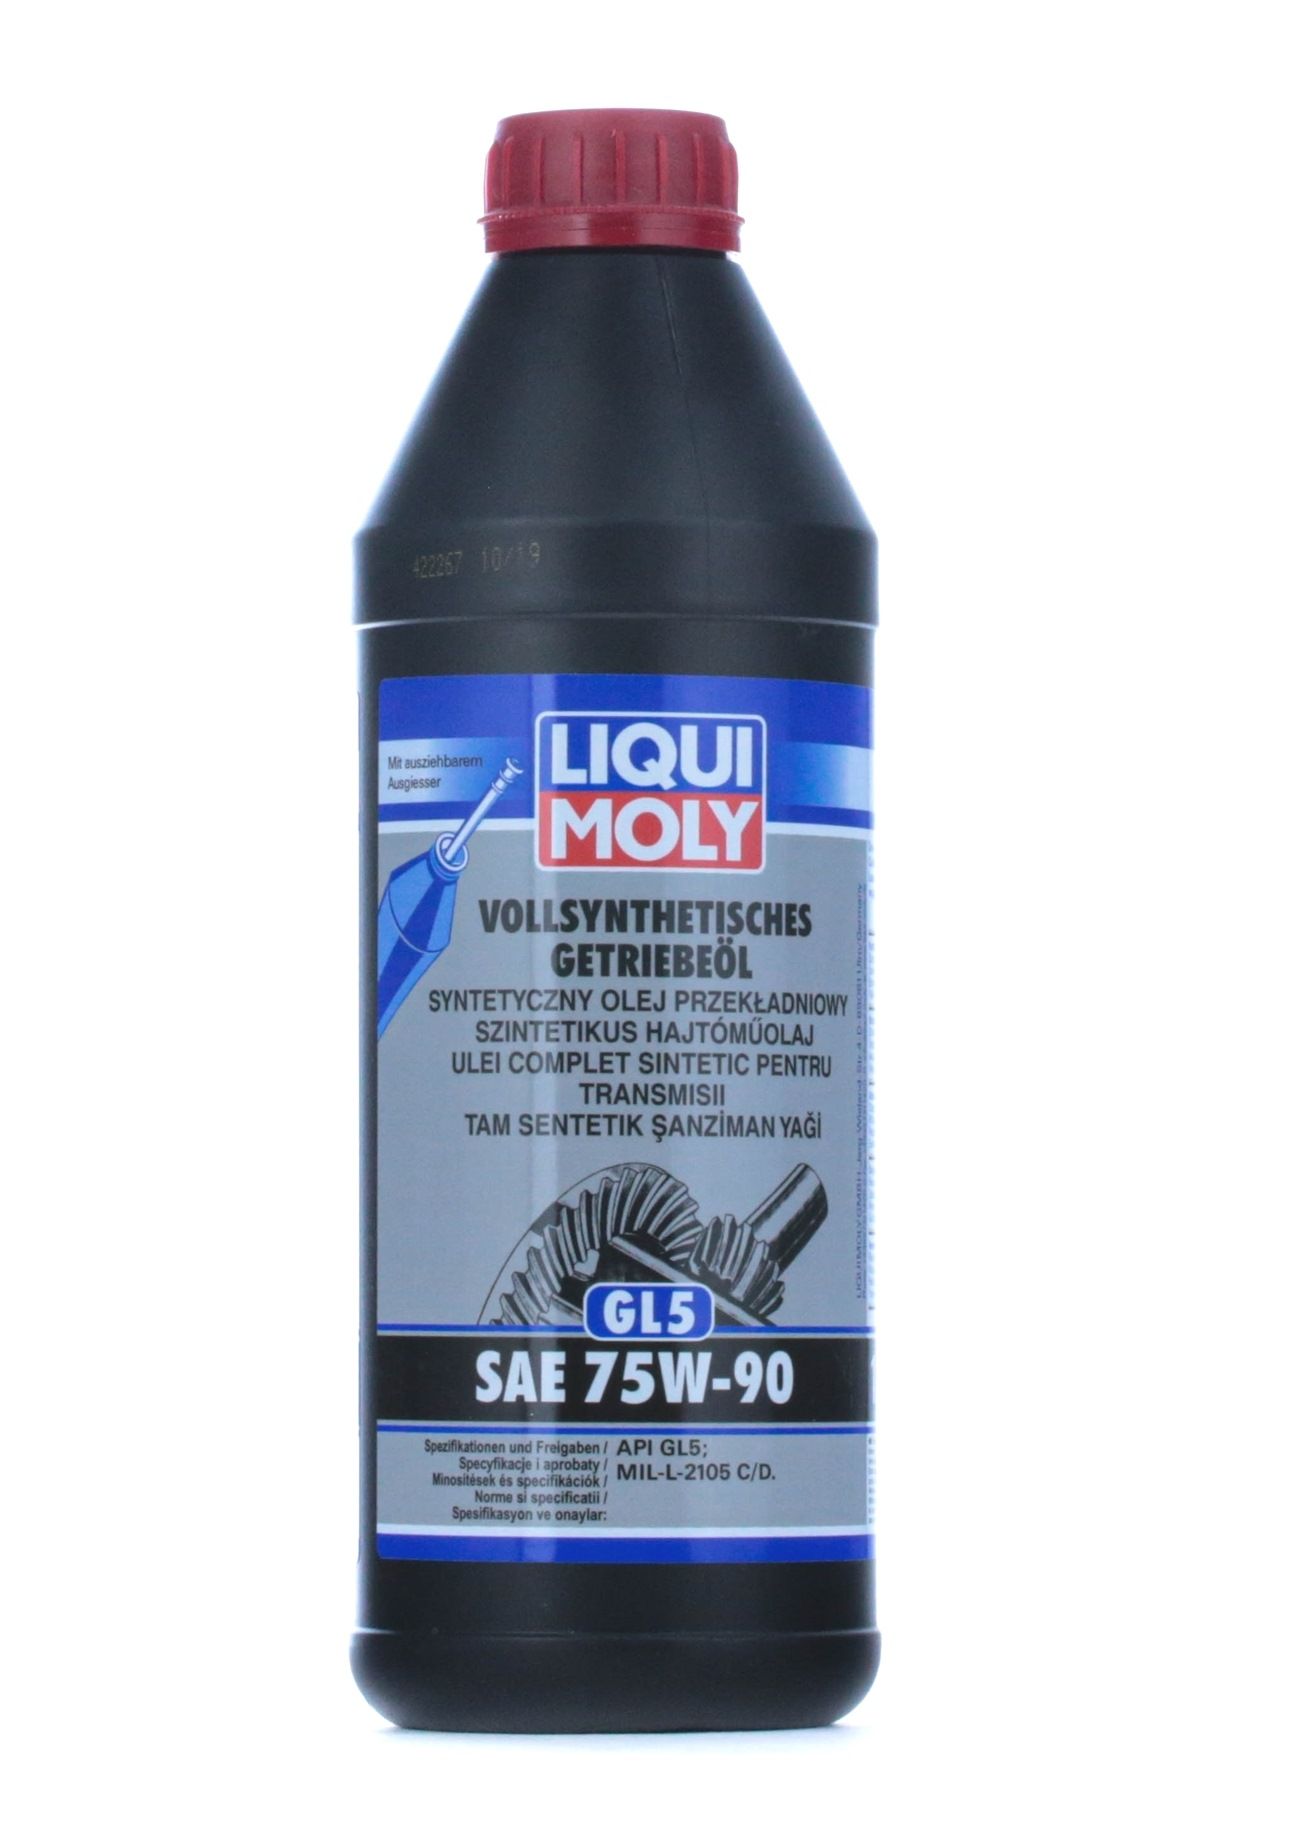 Great value for money - LIQUI MOLY Axle Gear Oil 2183